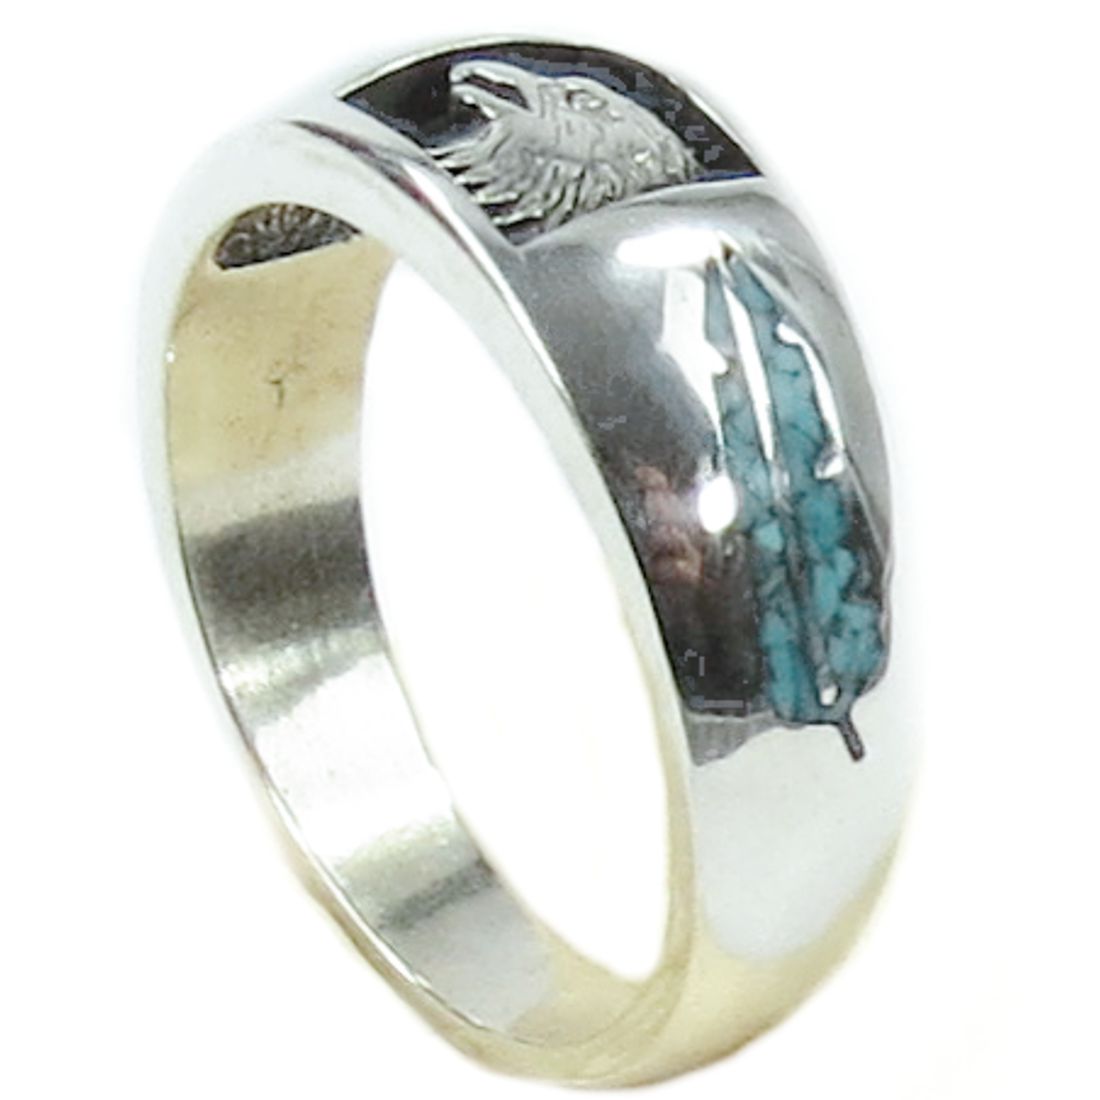 Indianerschmuck Ring aus Sterling Silber - Eagle And Feathers, Türkis